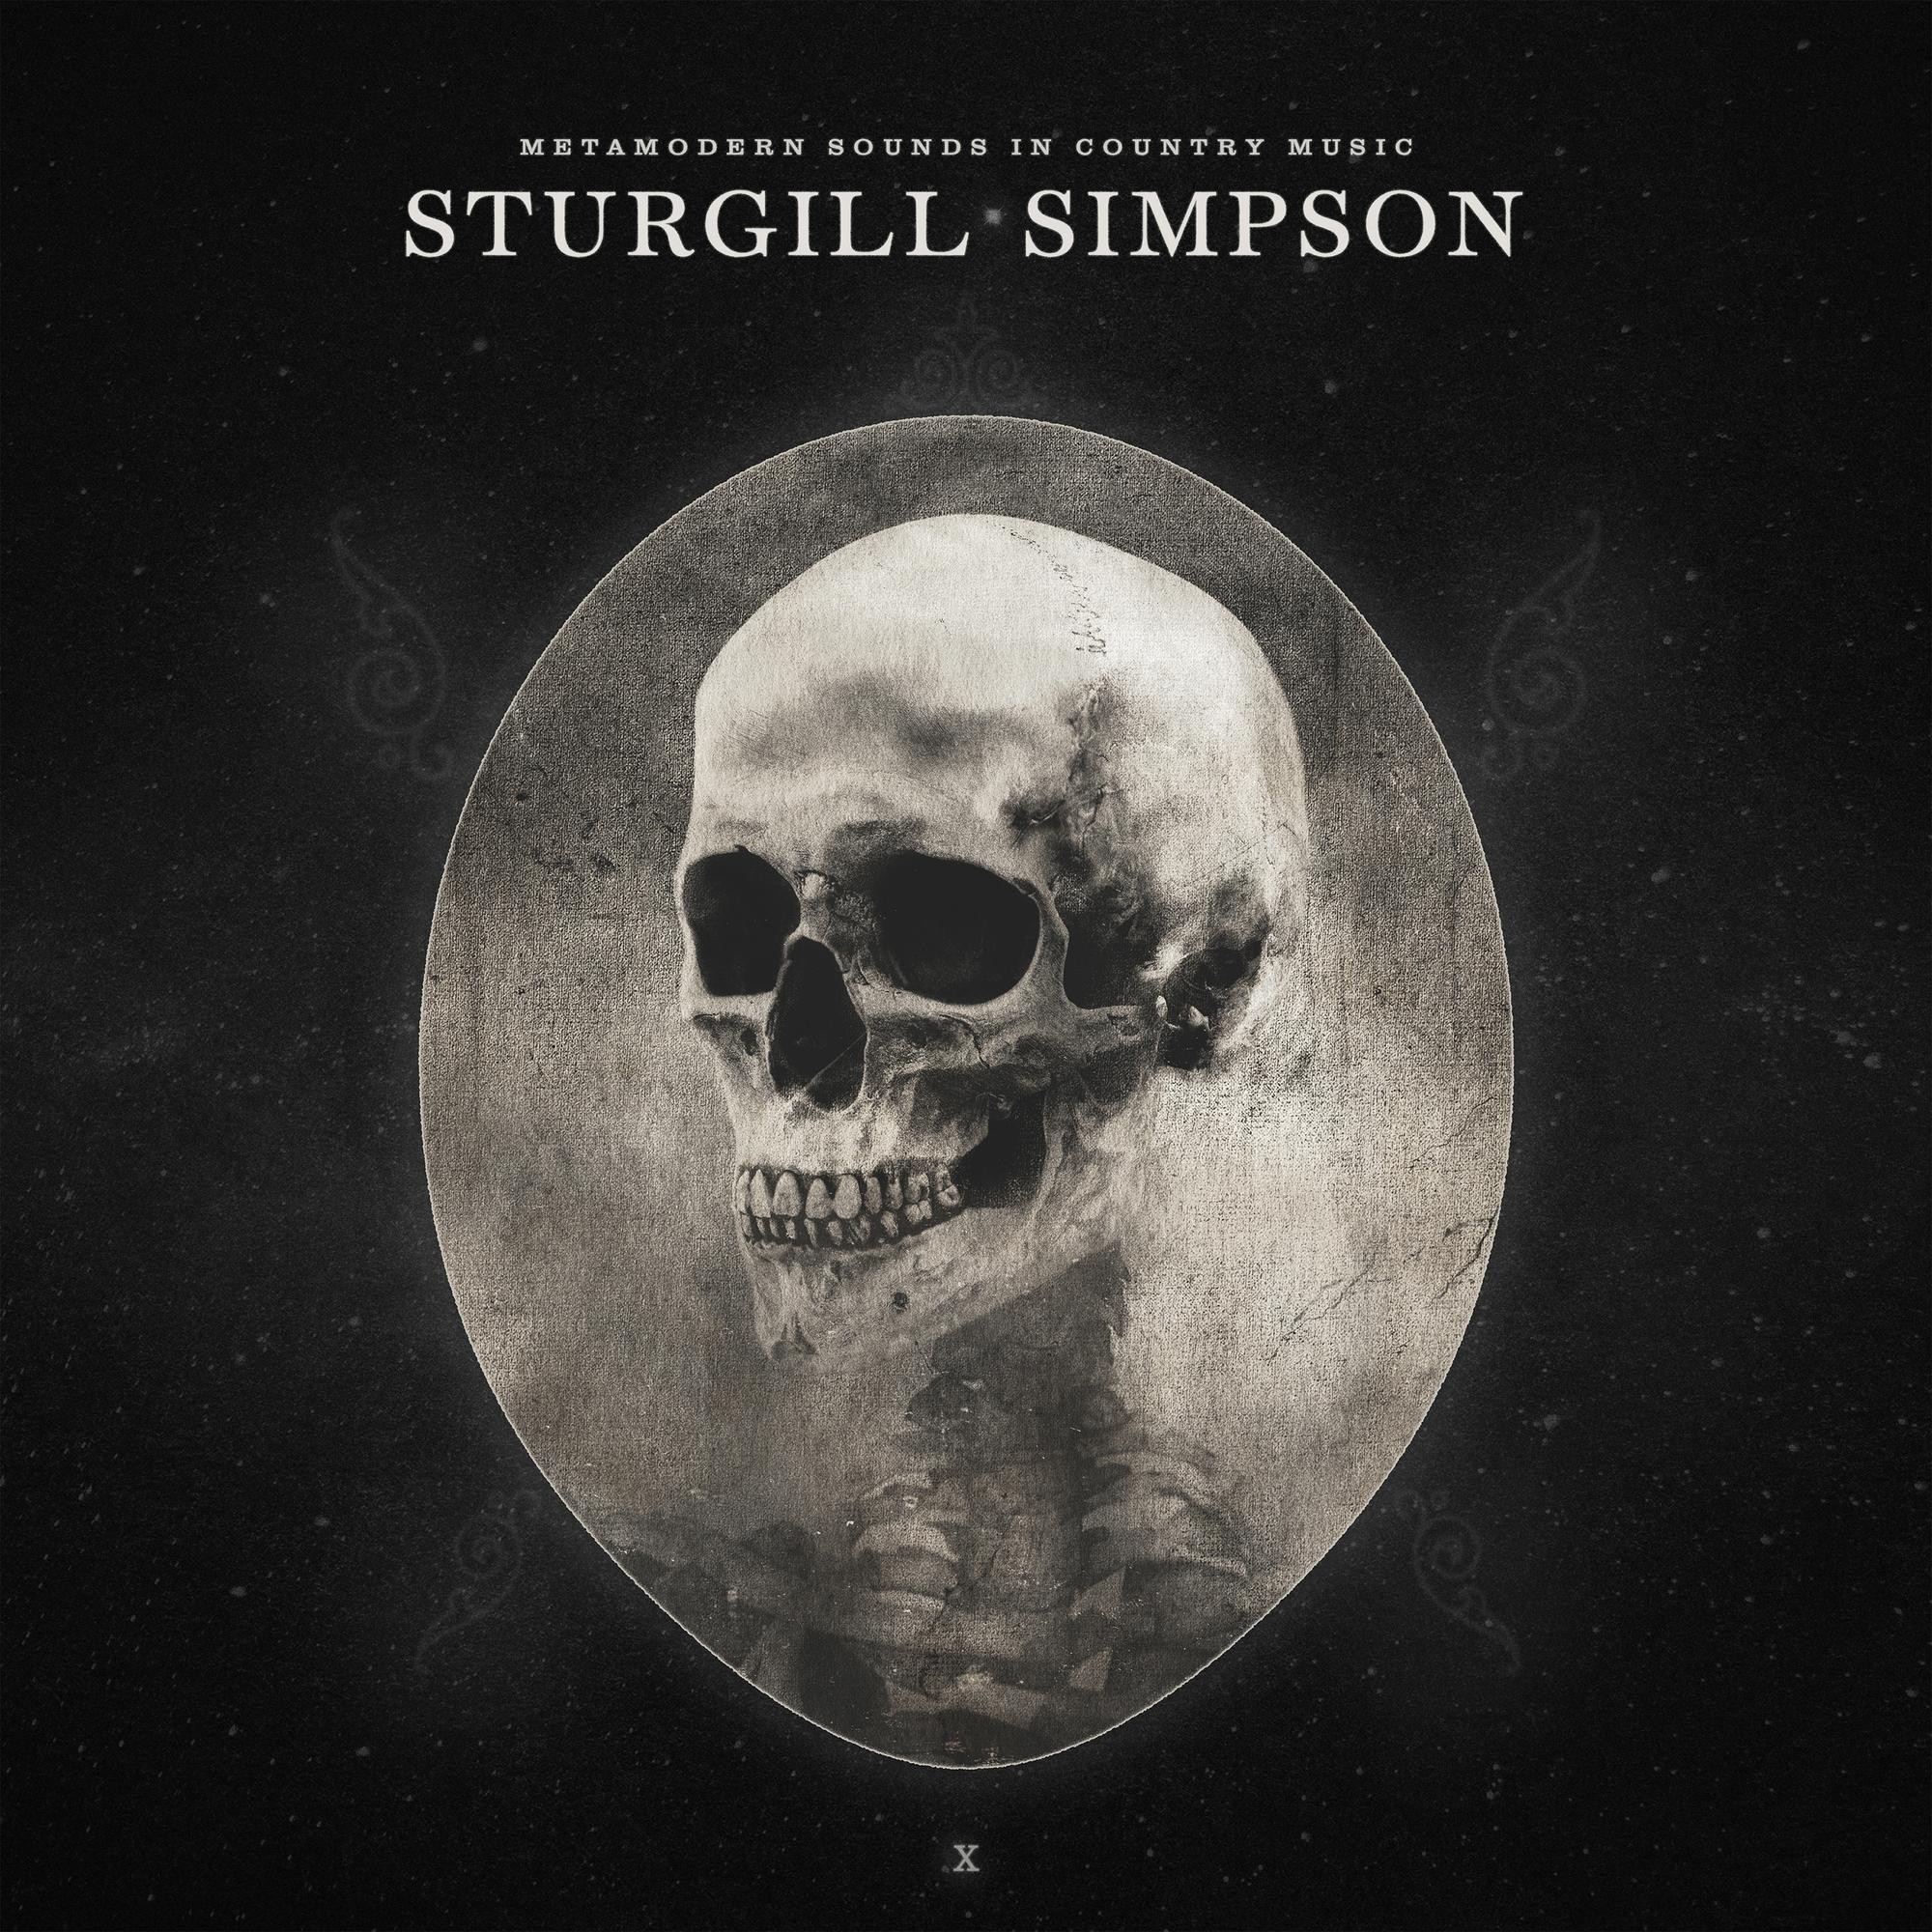 Sturgill Simpson- Metamodern Sounds In Country Music (10 Year Anniversary Edition)